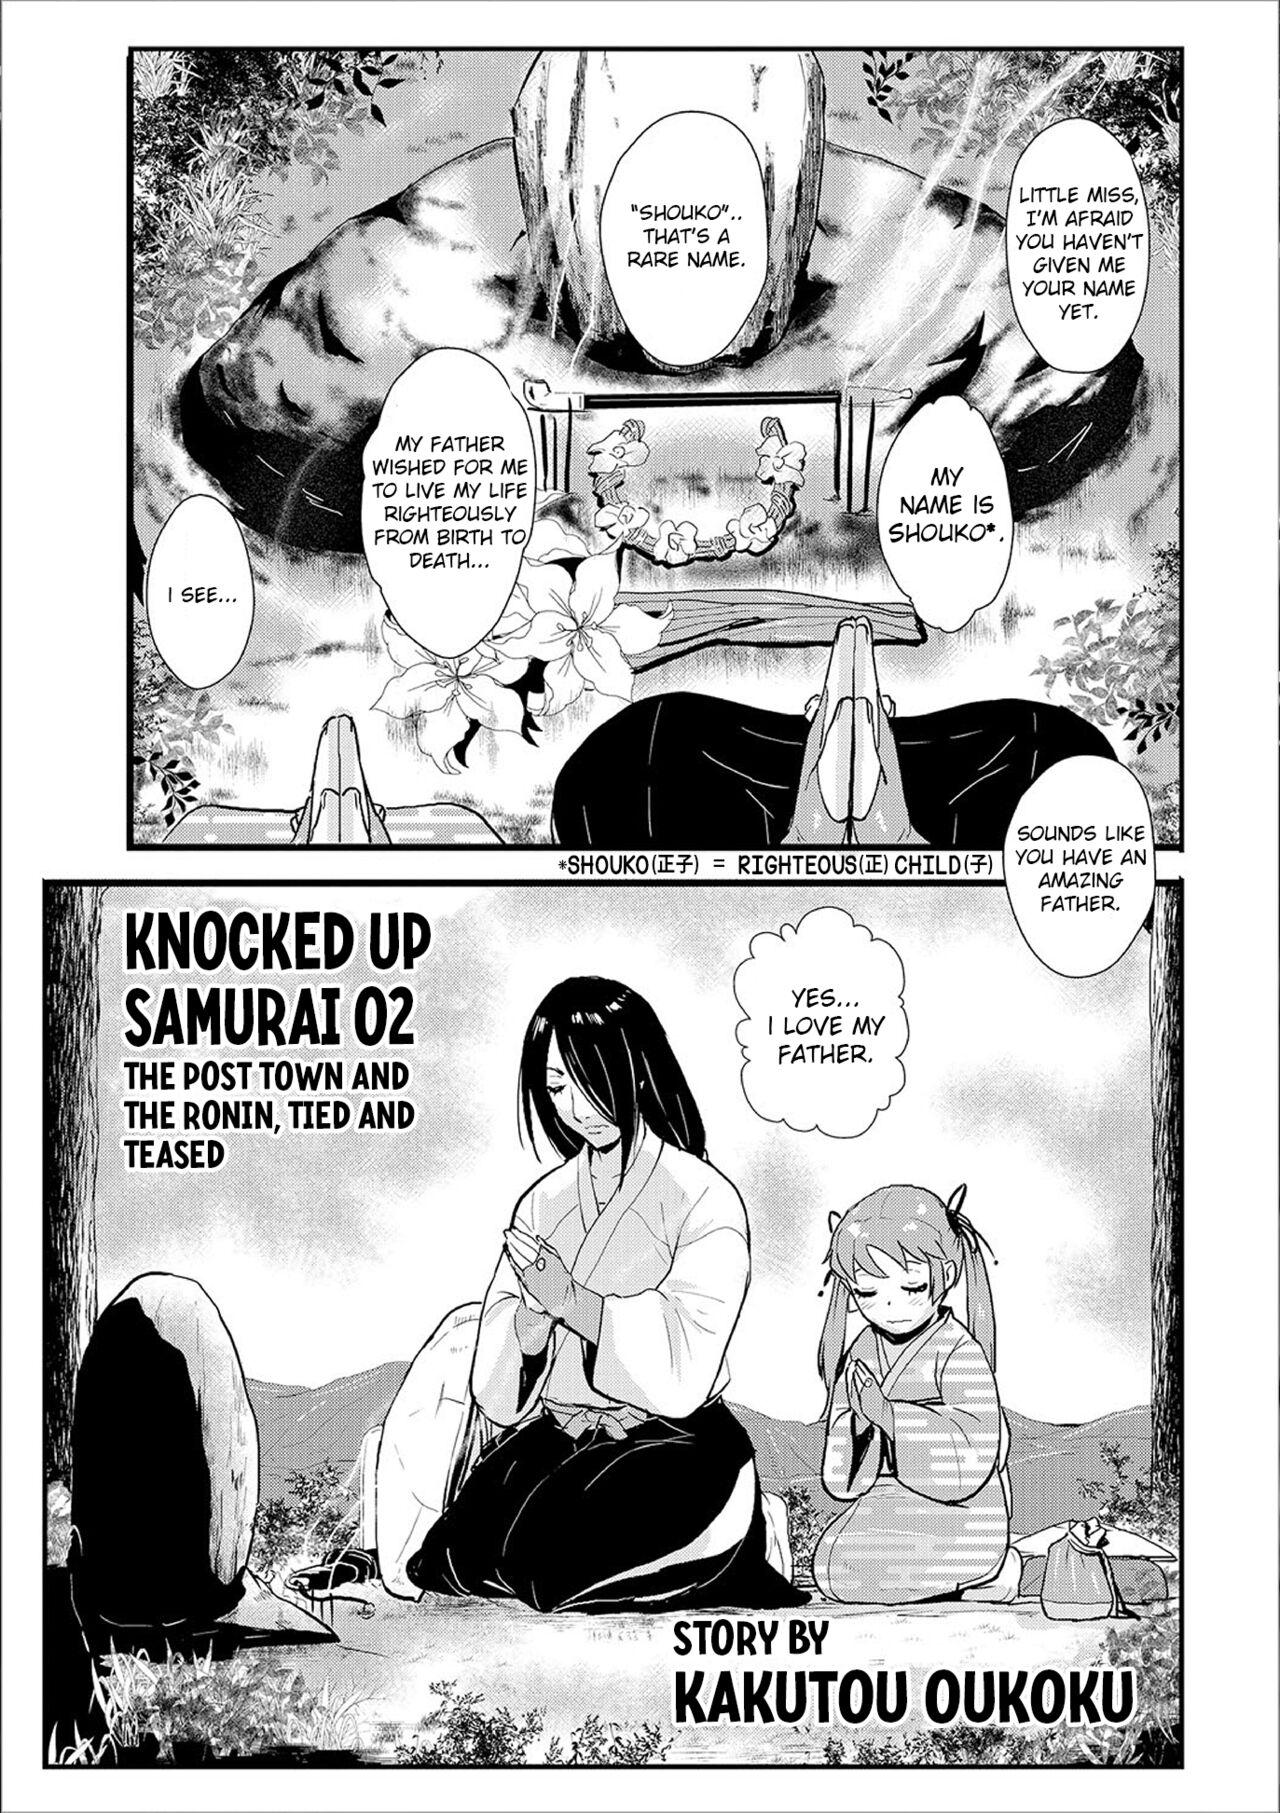 Chacal Knocked Up Samurai 02: The Post Town and the Ronin, Tied and Teased Free Fuck - Page 1